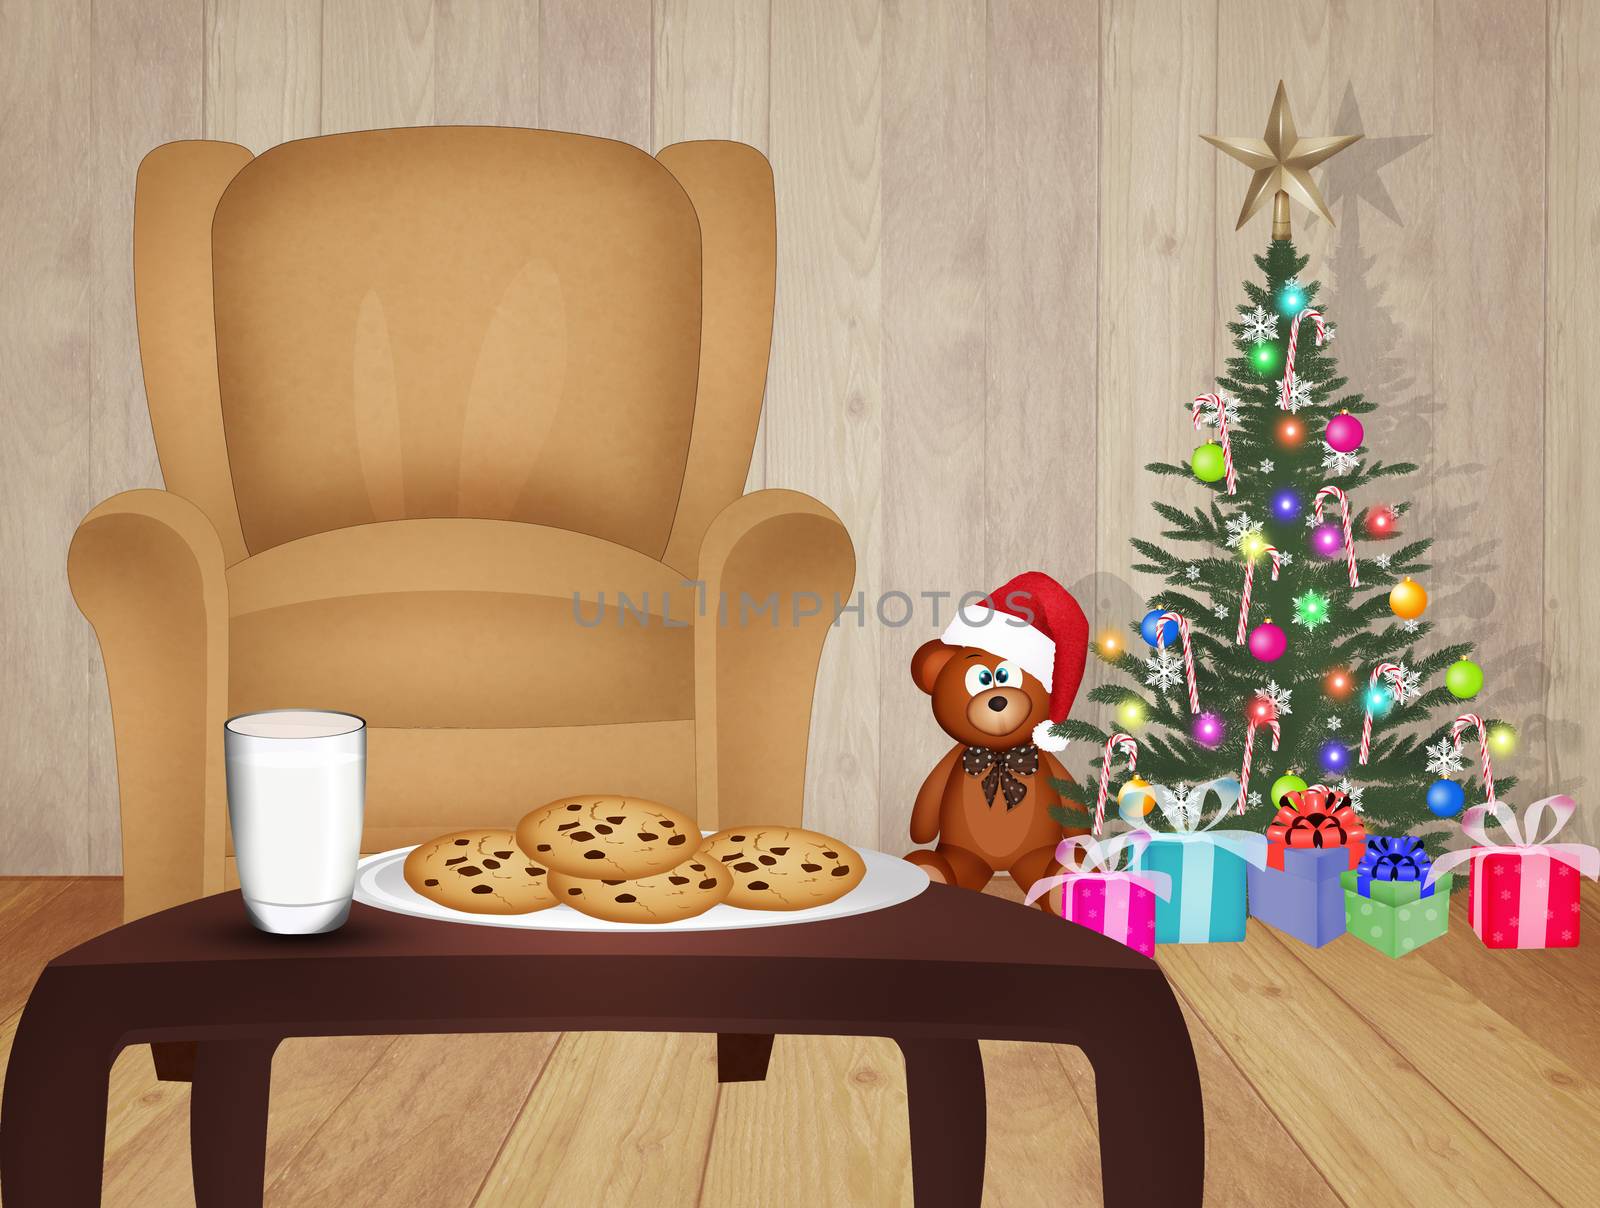 cookies and milk for Santa Claus by adrenalina